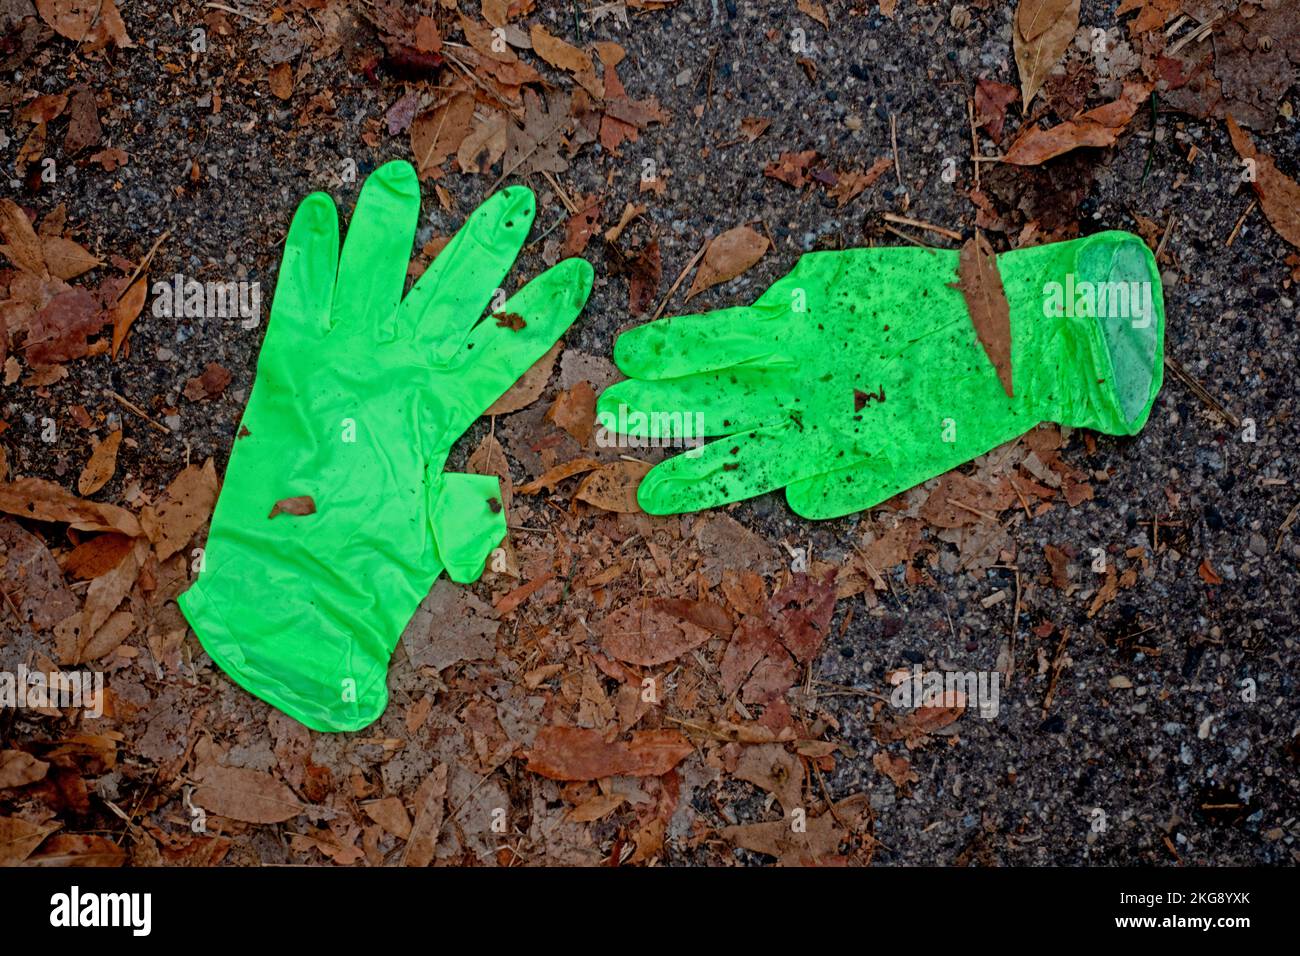 Bright lime green garden gloves found in the street among autumn leaves. St Paul Minnesota MN USA Stock Photo